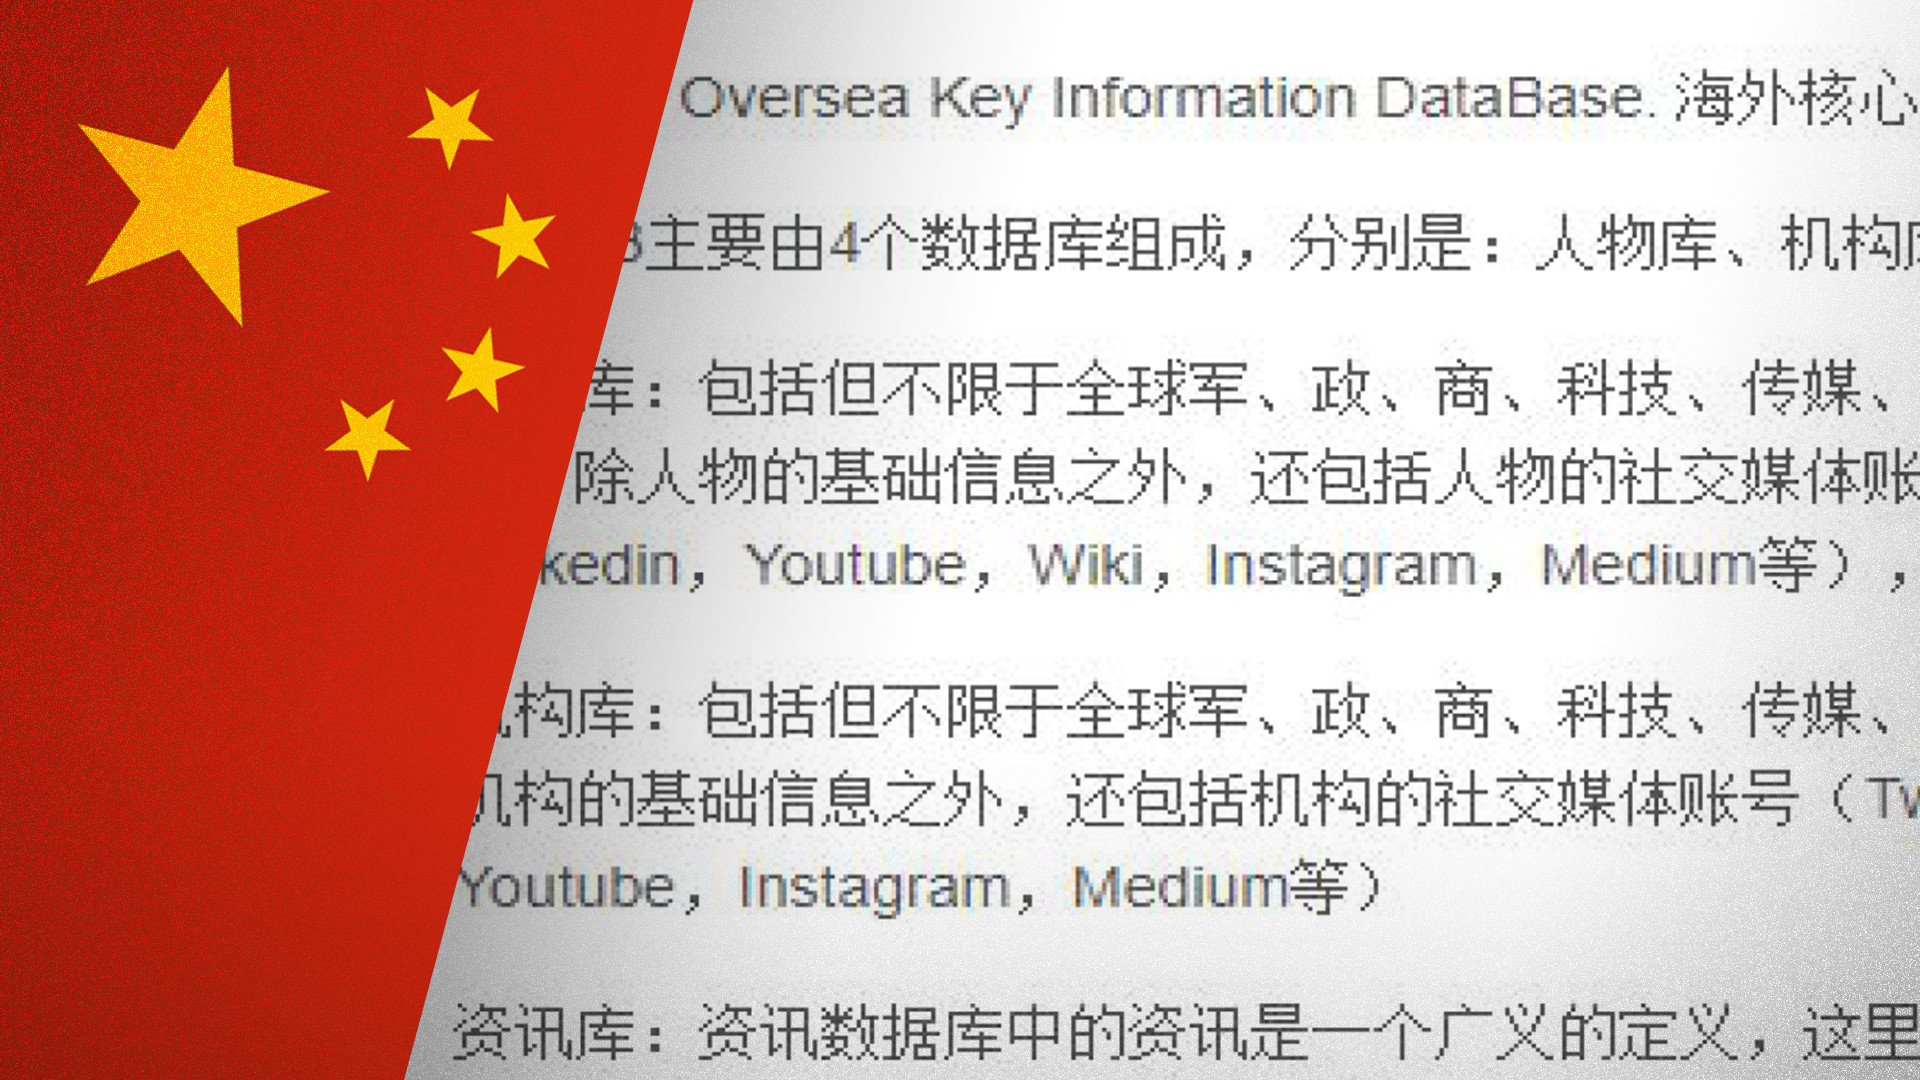 The leak reveals 799 Finns on the Chinese watch list